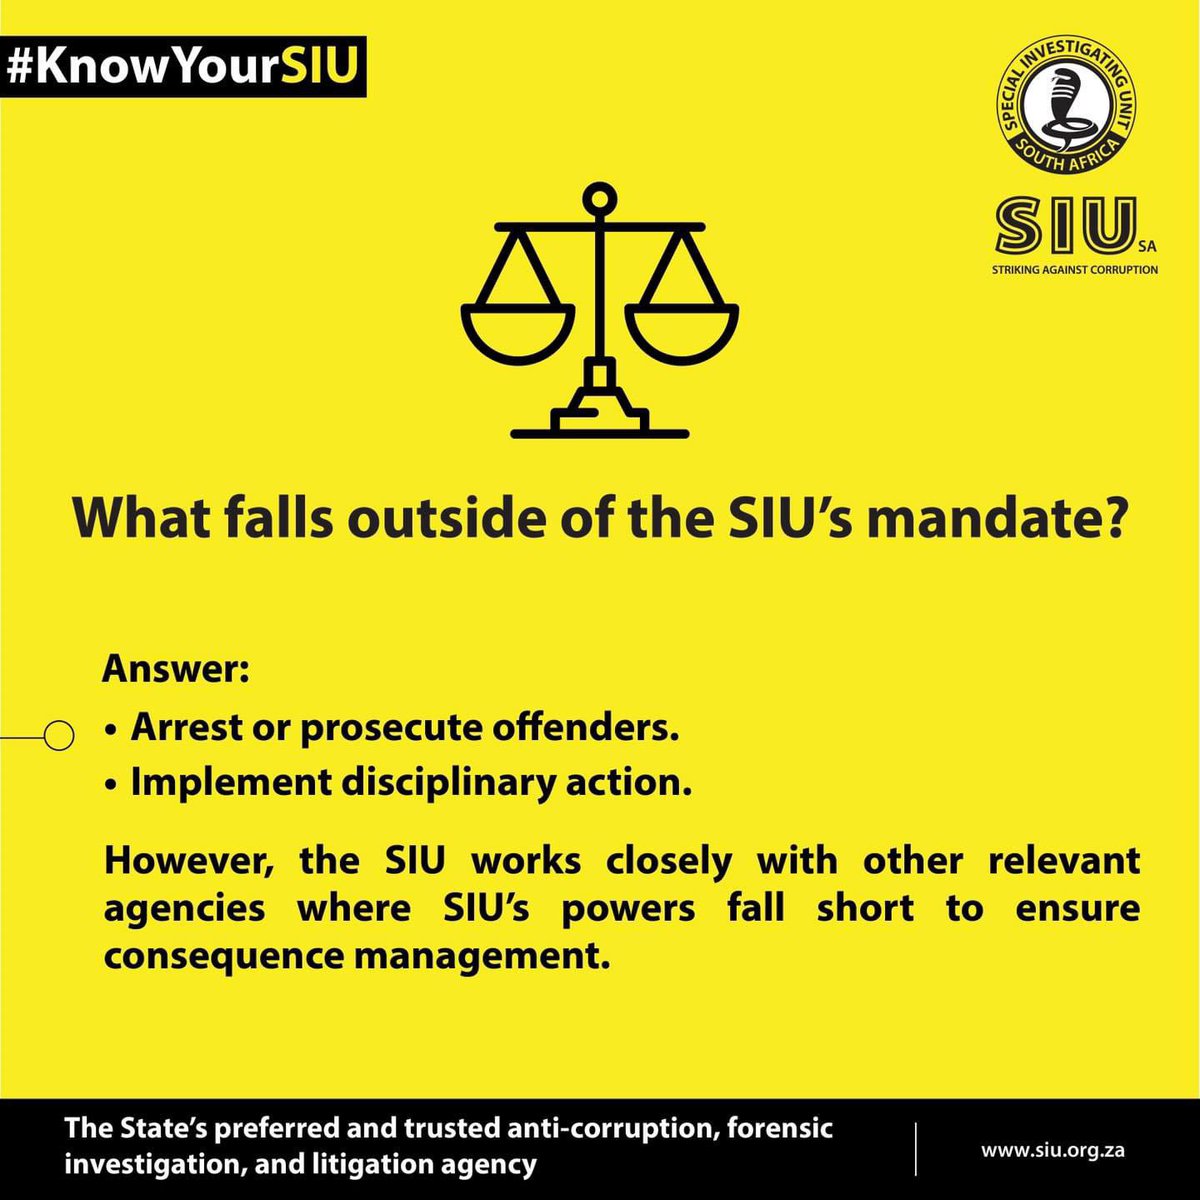 #KnowYourSIU| The SIU is mandated to investigate, recover and recommend consequence management measures. However, the SIU does not have the power to institute arrests or prosecute offenders. We refer to evidence pointing to criminal conduct to our law enforcement partners